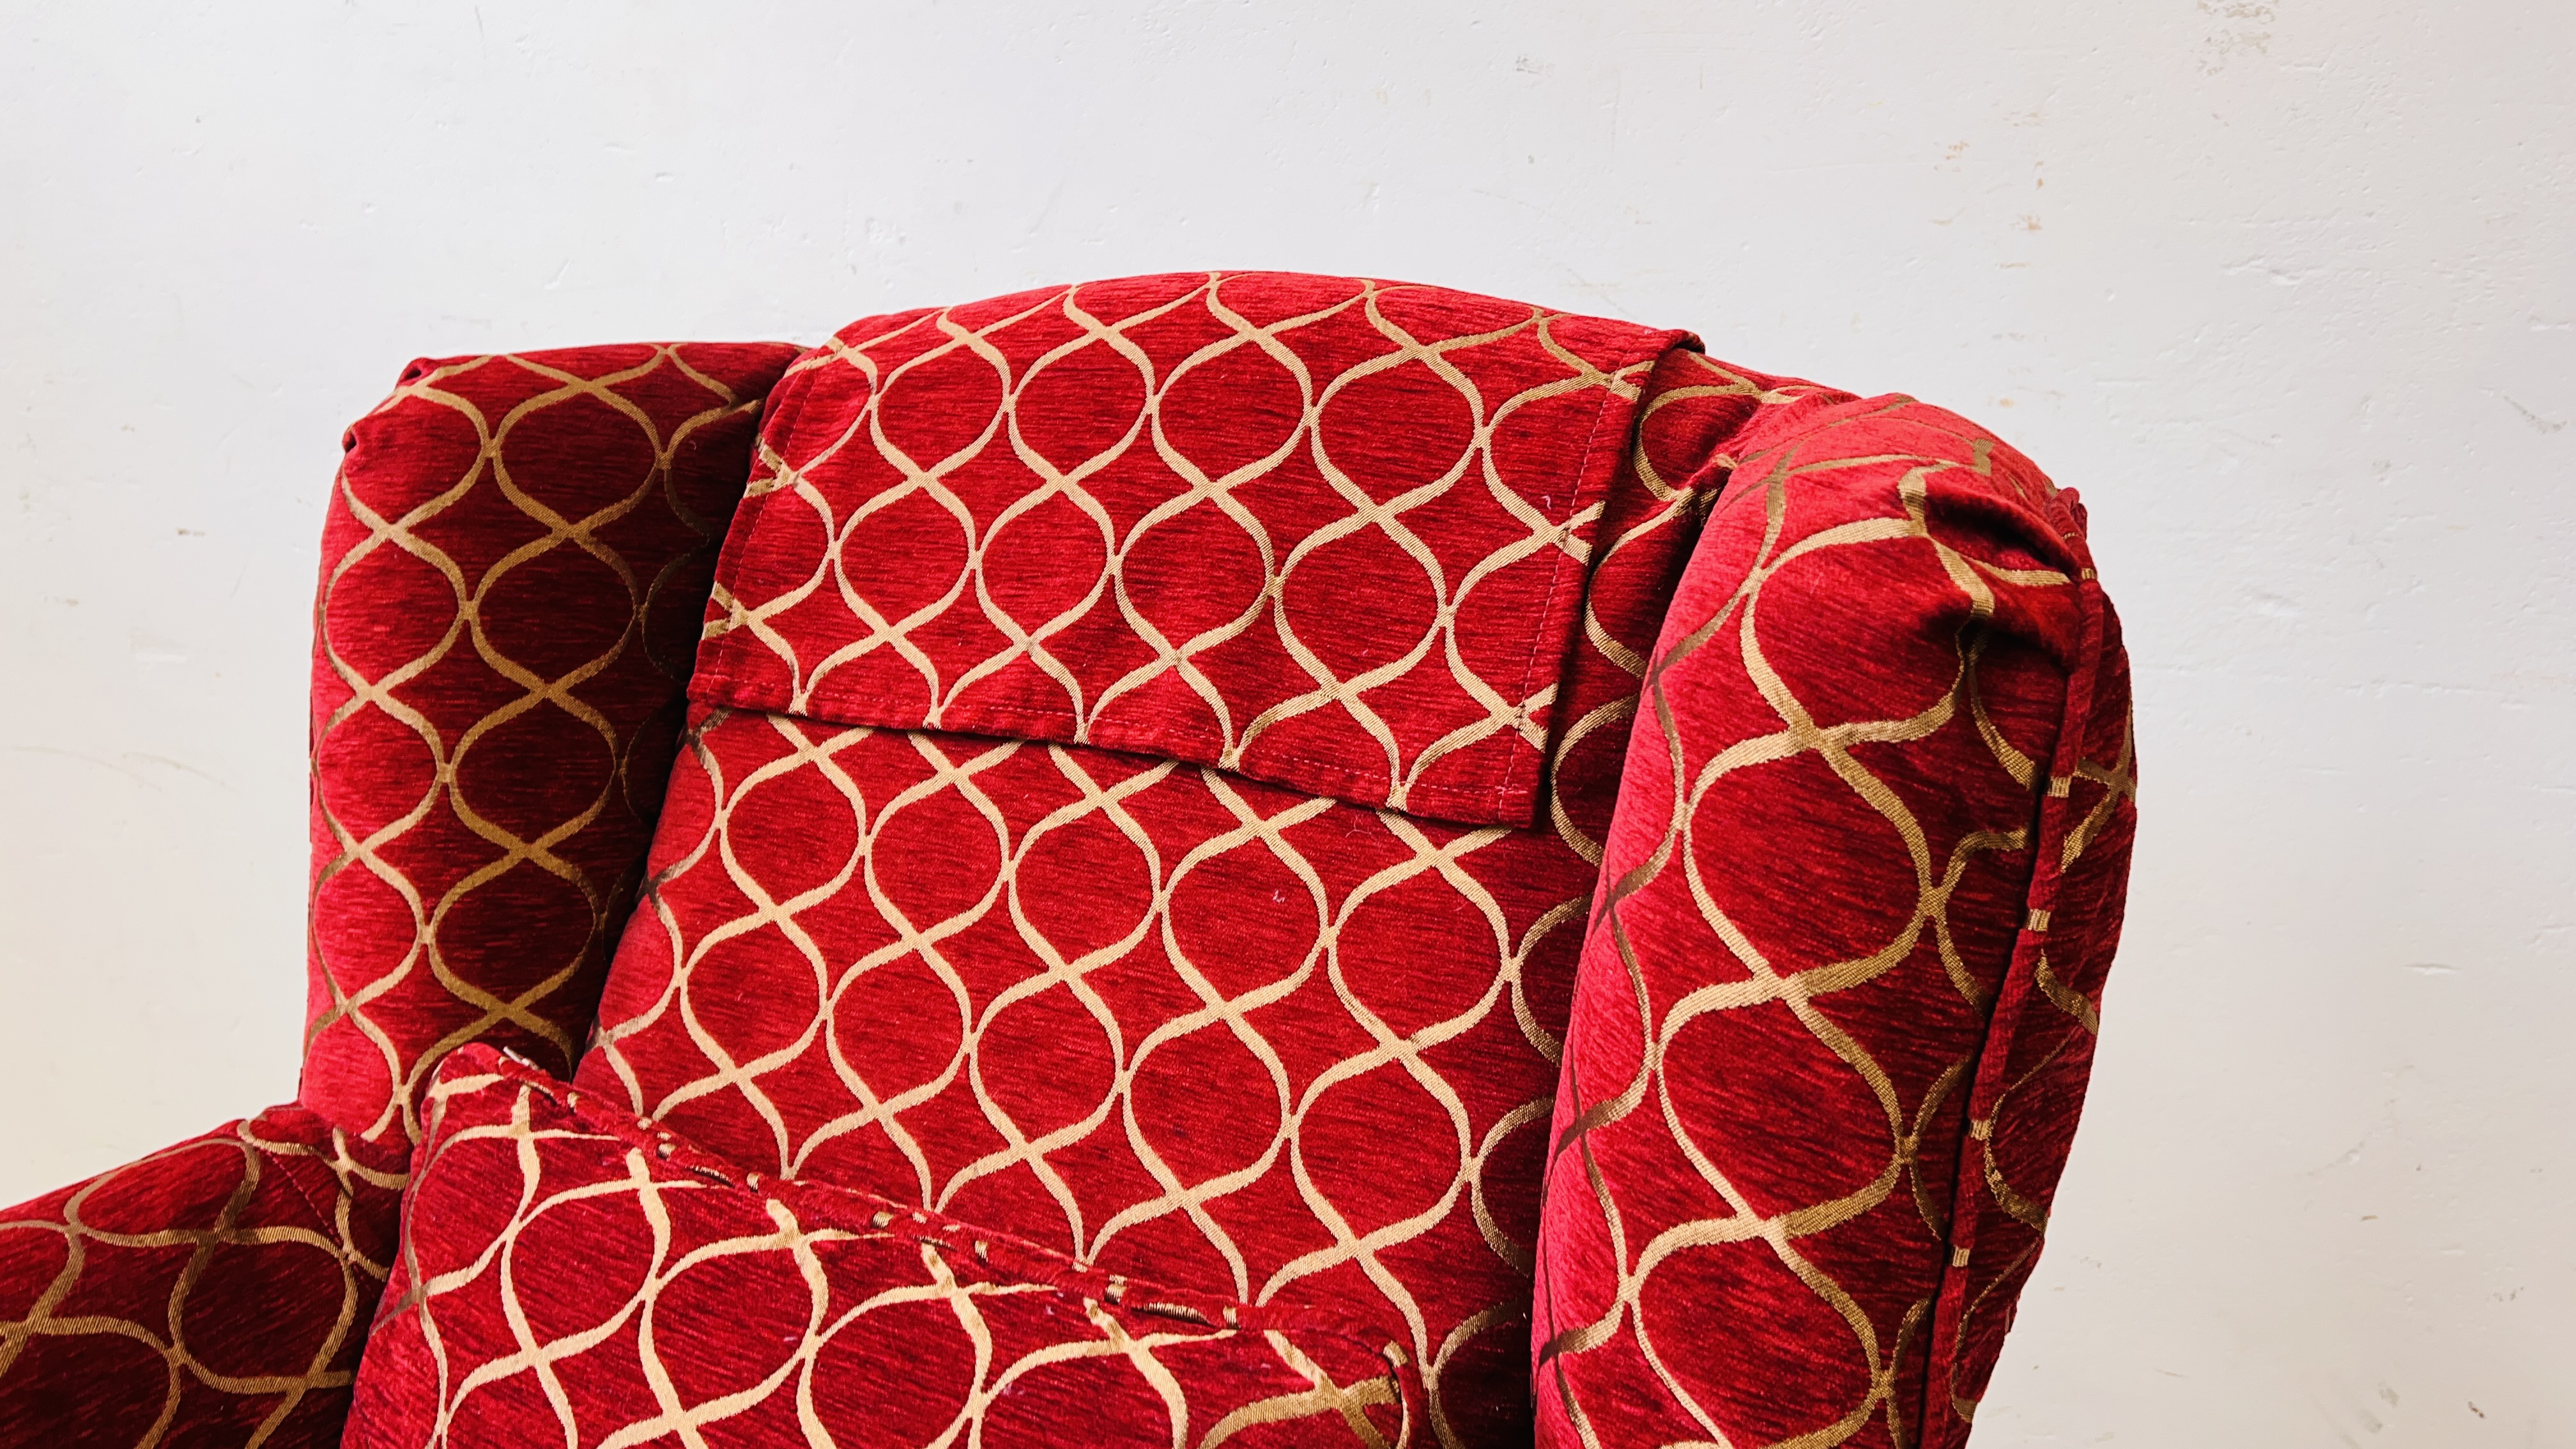 A MODERN WING BACK CHAIR UPHOLSTERED IN RED AND GOLD - Image 2 of 8